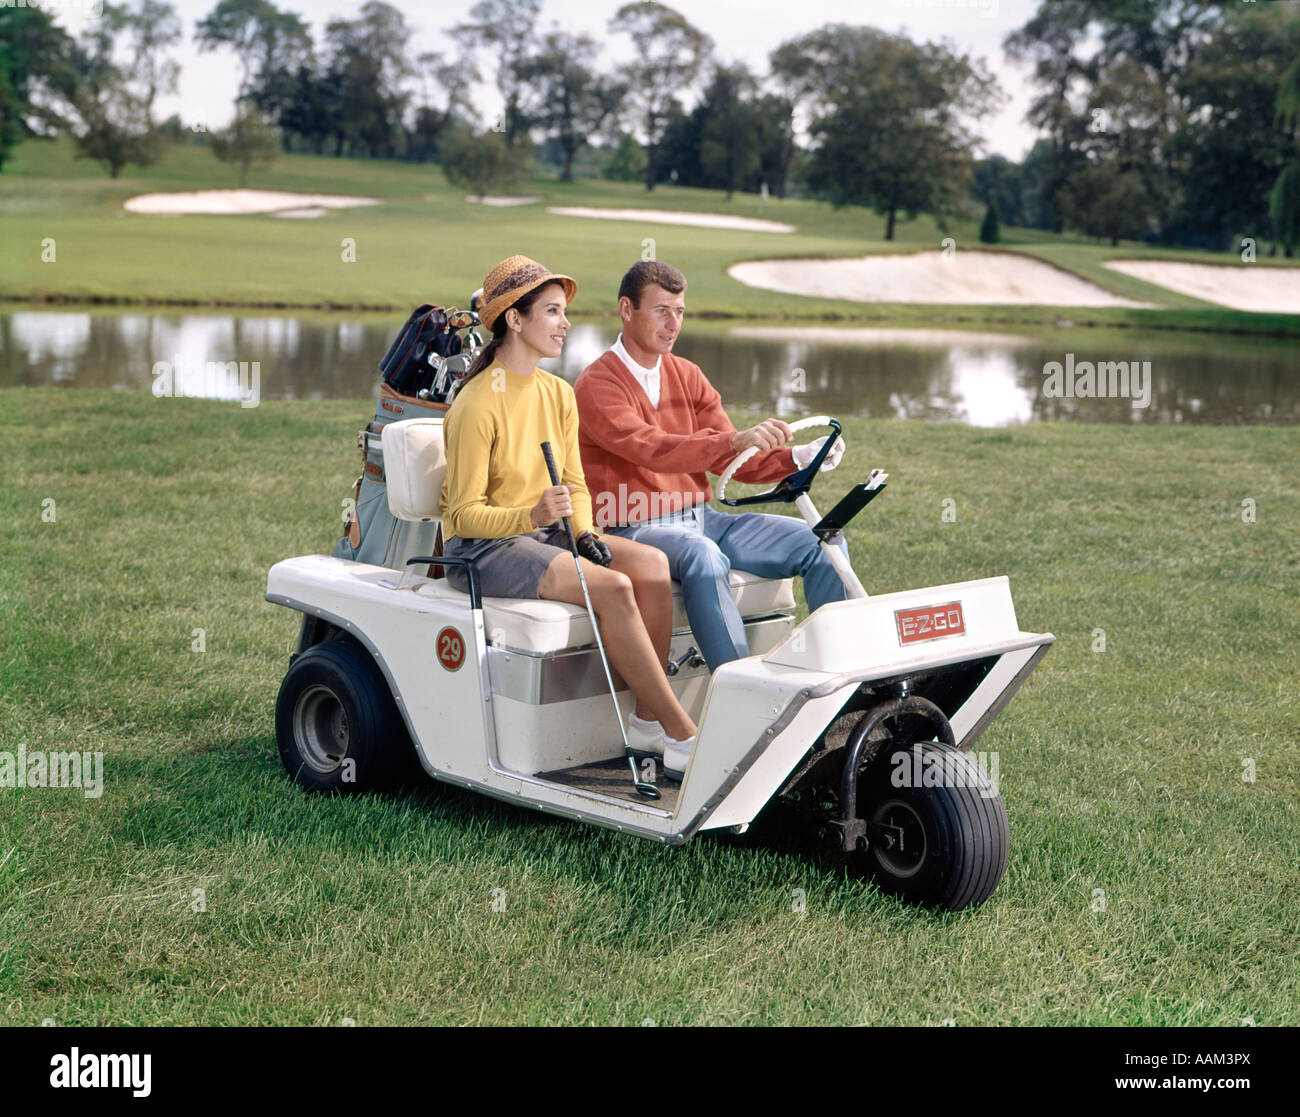 1960s MAN AND WOMAN IN GOLF CART DRIVING ACROSS GRASS NEAR WATER COUPLE HOBBY LIFESTYLE GOLF CLUBS BAG Stock Photo